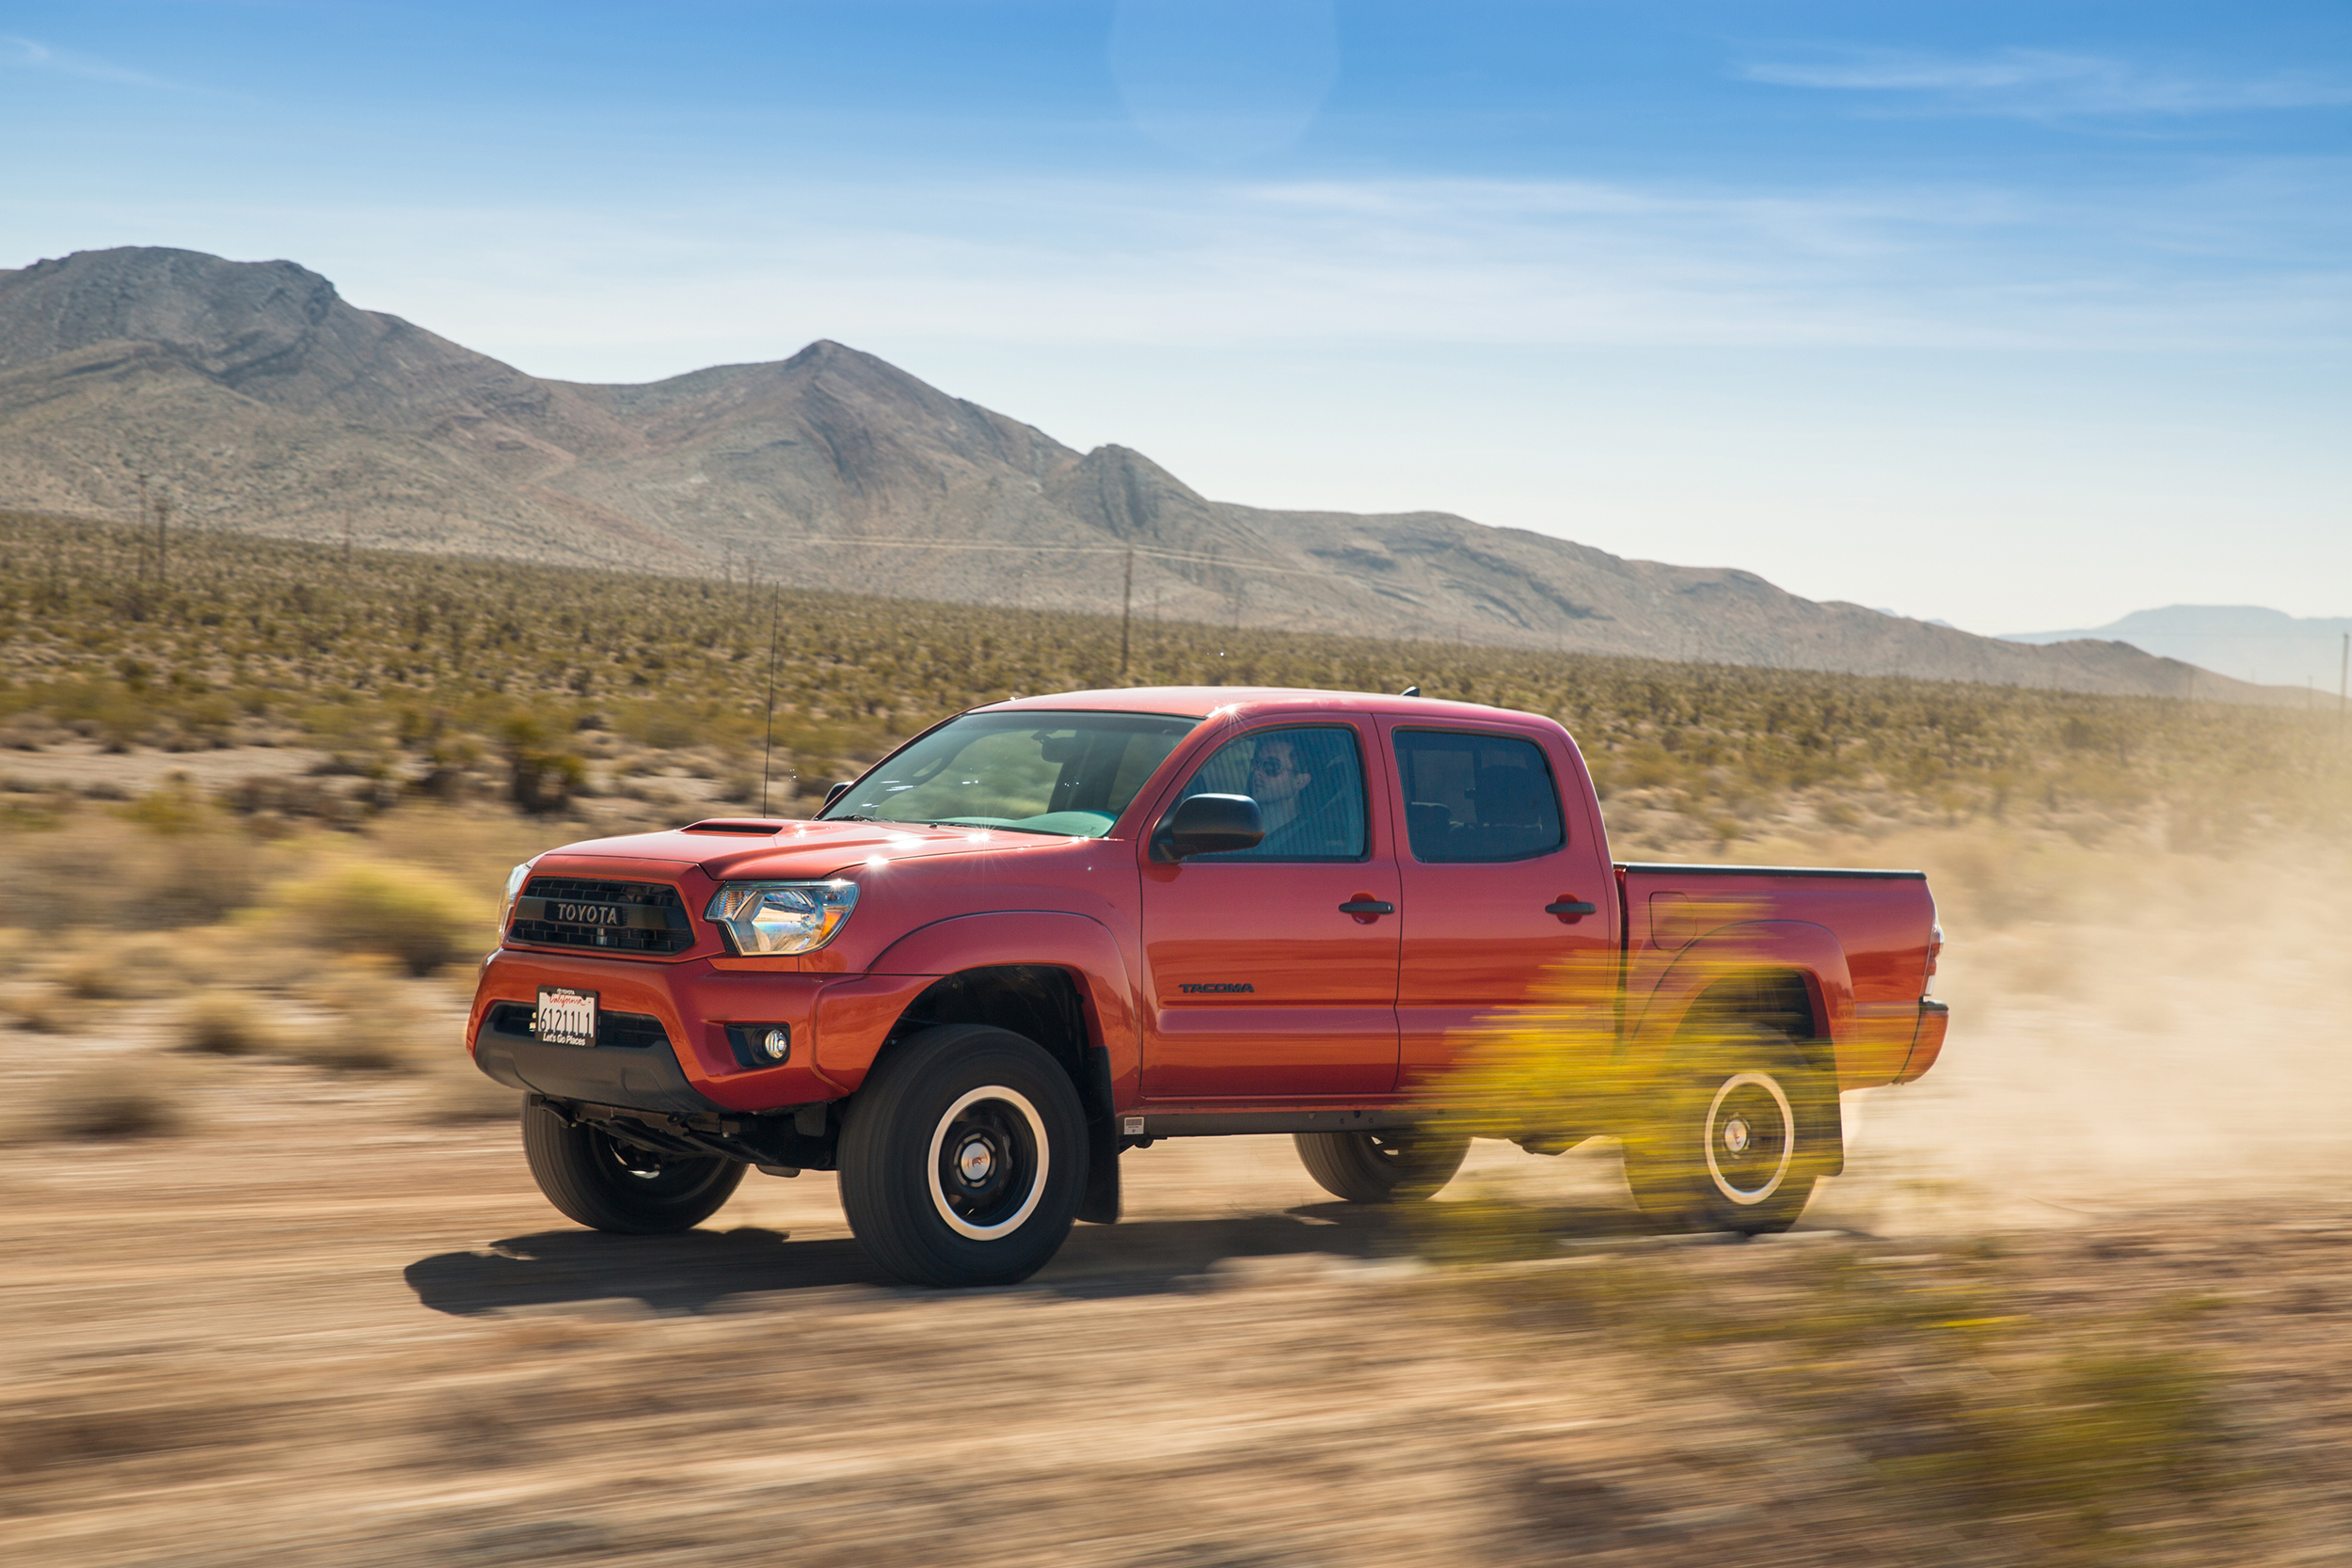 Toyota Tacoma 4x4 Access Cab V6 At 2015 International Price And Overview